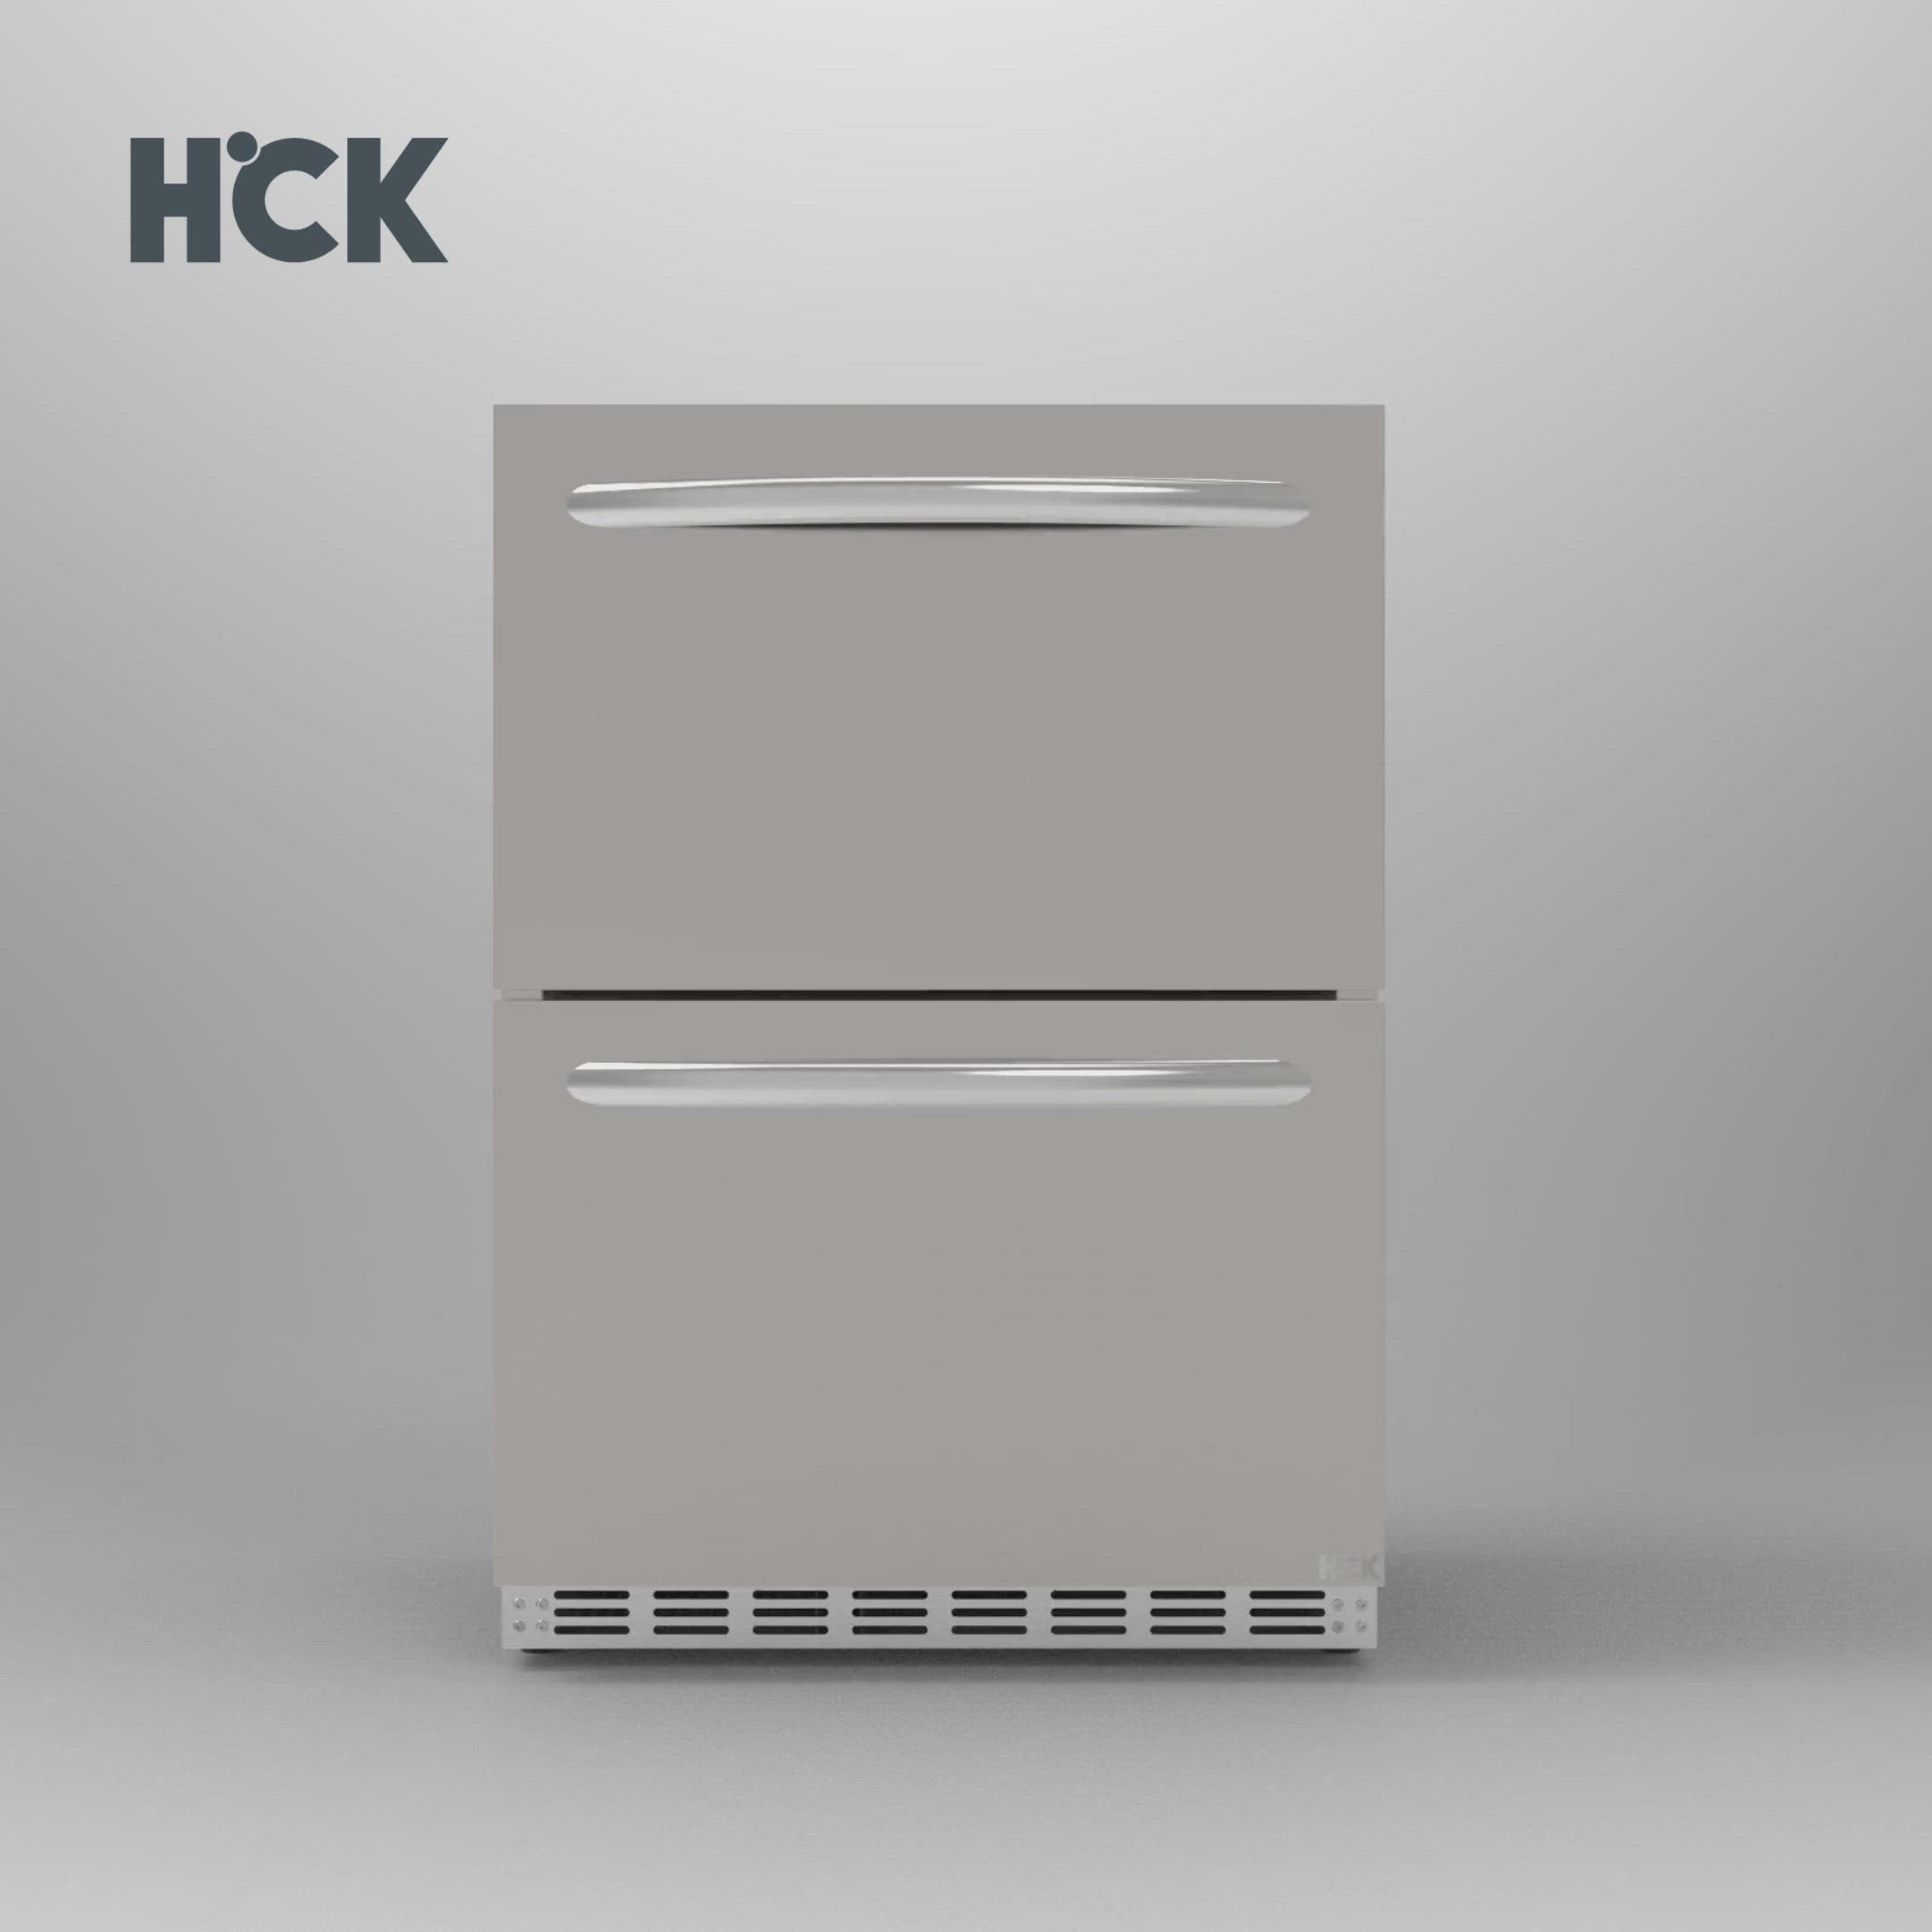 HCK 24 inch Weather Proof Design Indoor and Outdoor Undercounter Drawer Fridge, Built-In Beverage Refrigerator for Home and Commercial Use, Stainless